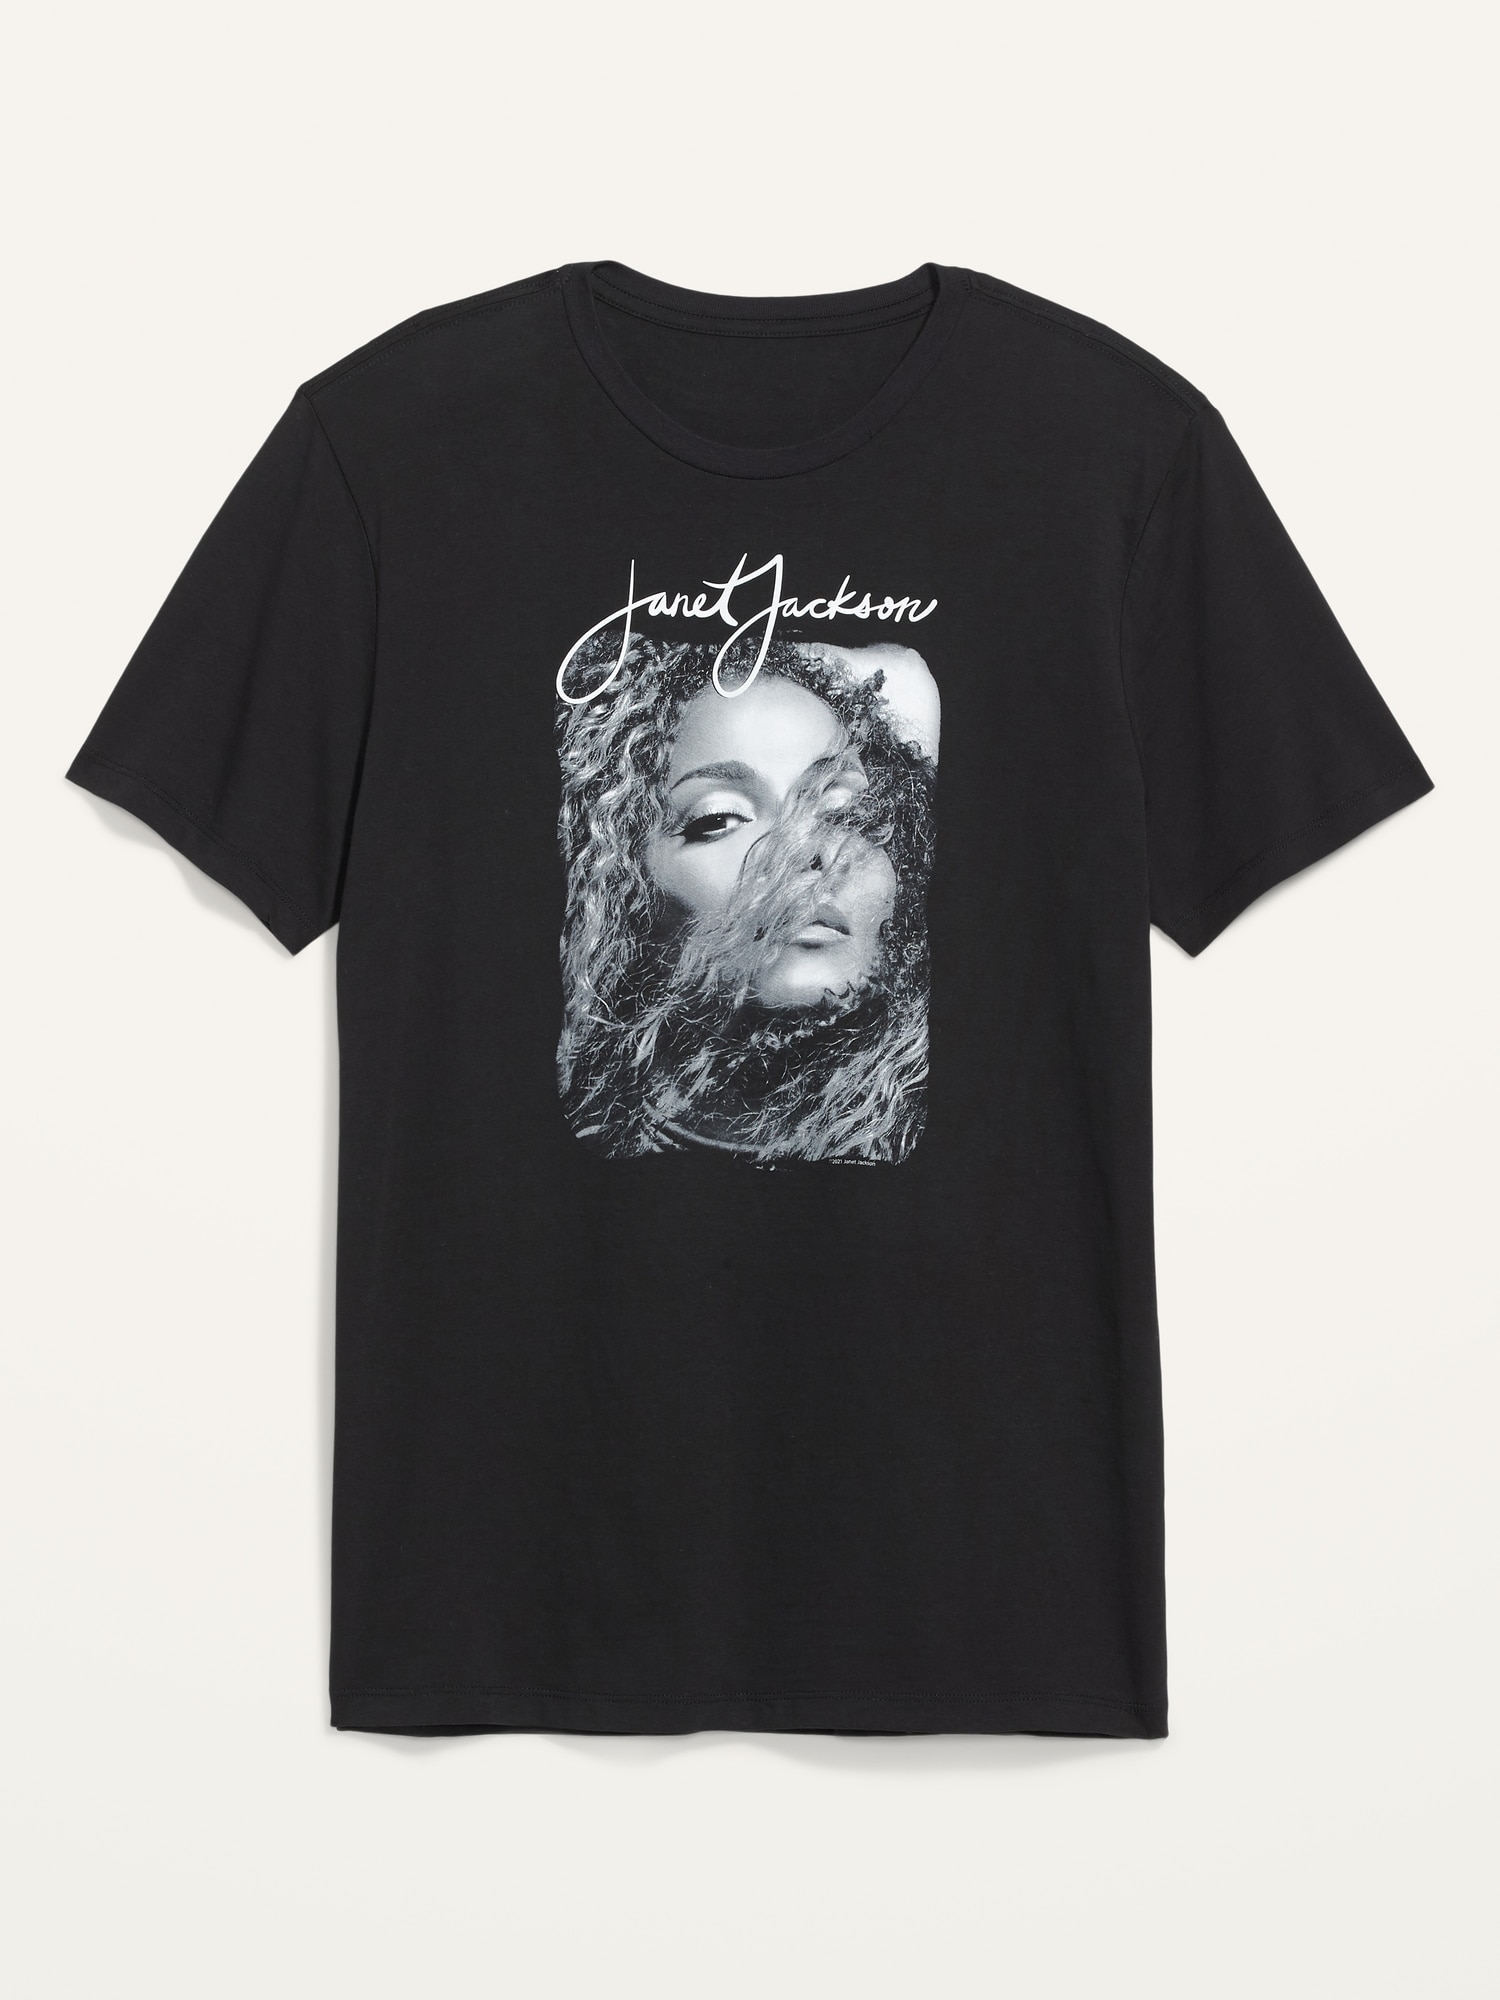 Janet Jackson™ Gender-Neutral Graphic T-Shirt for Adults